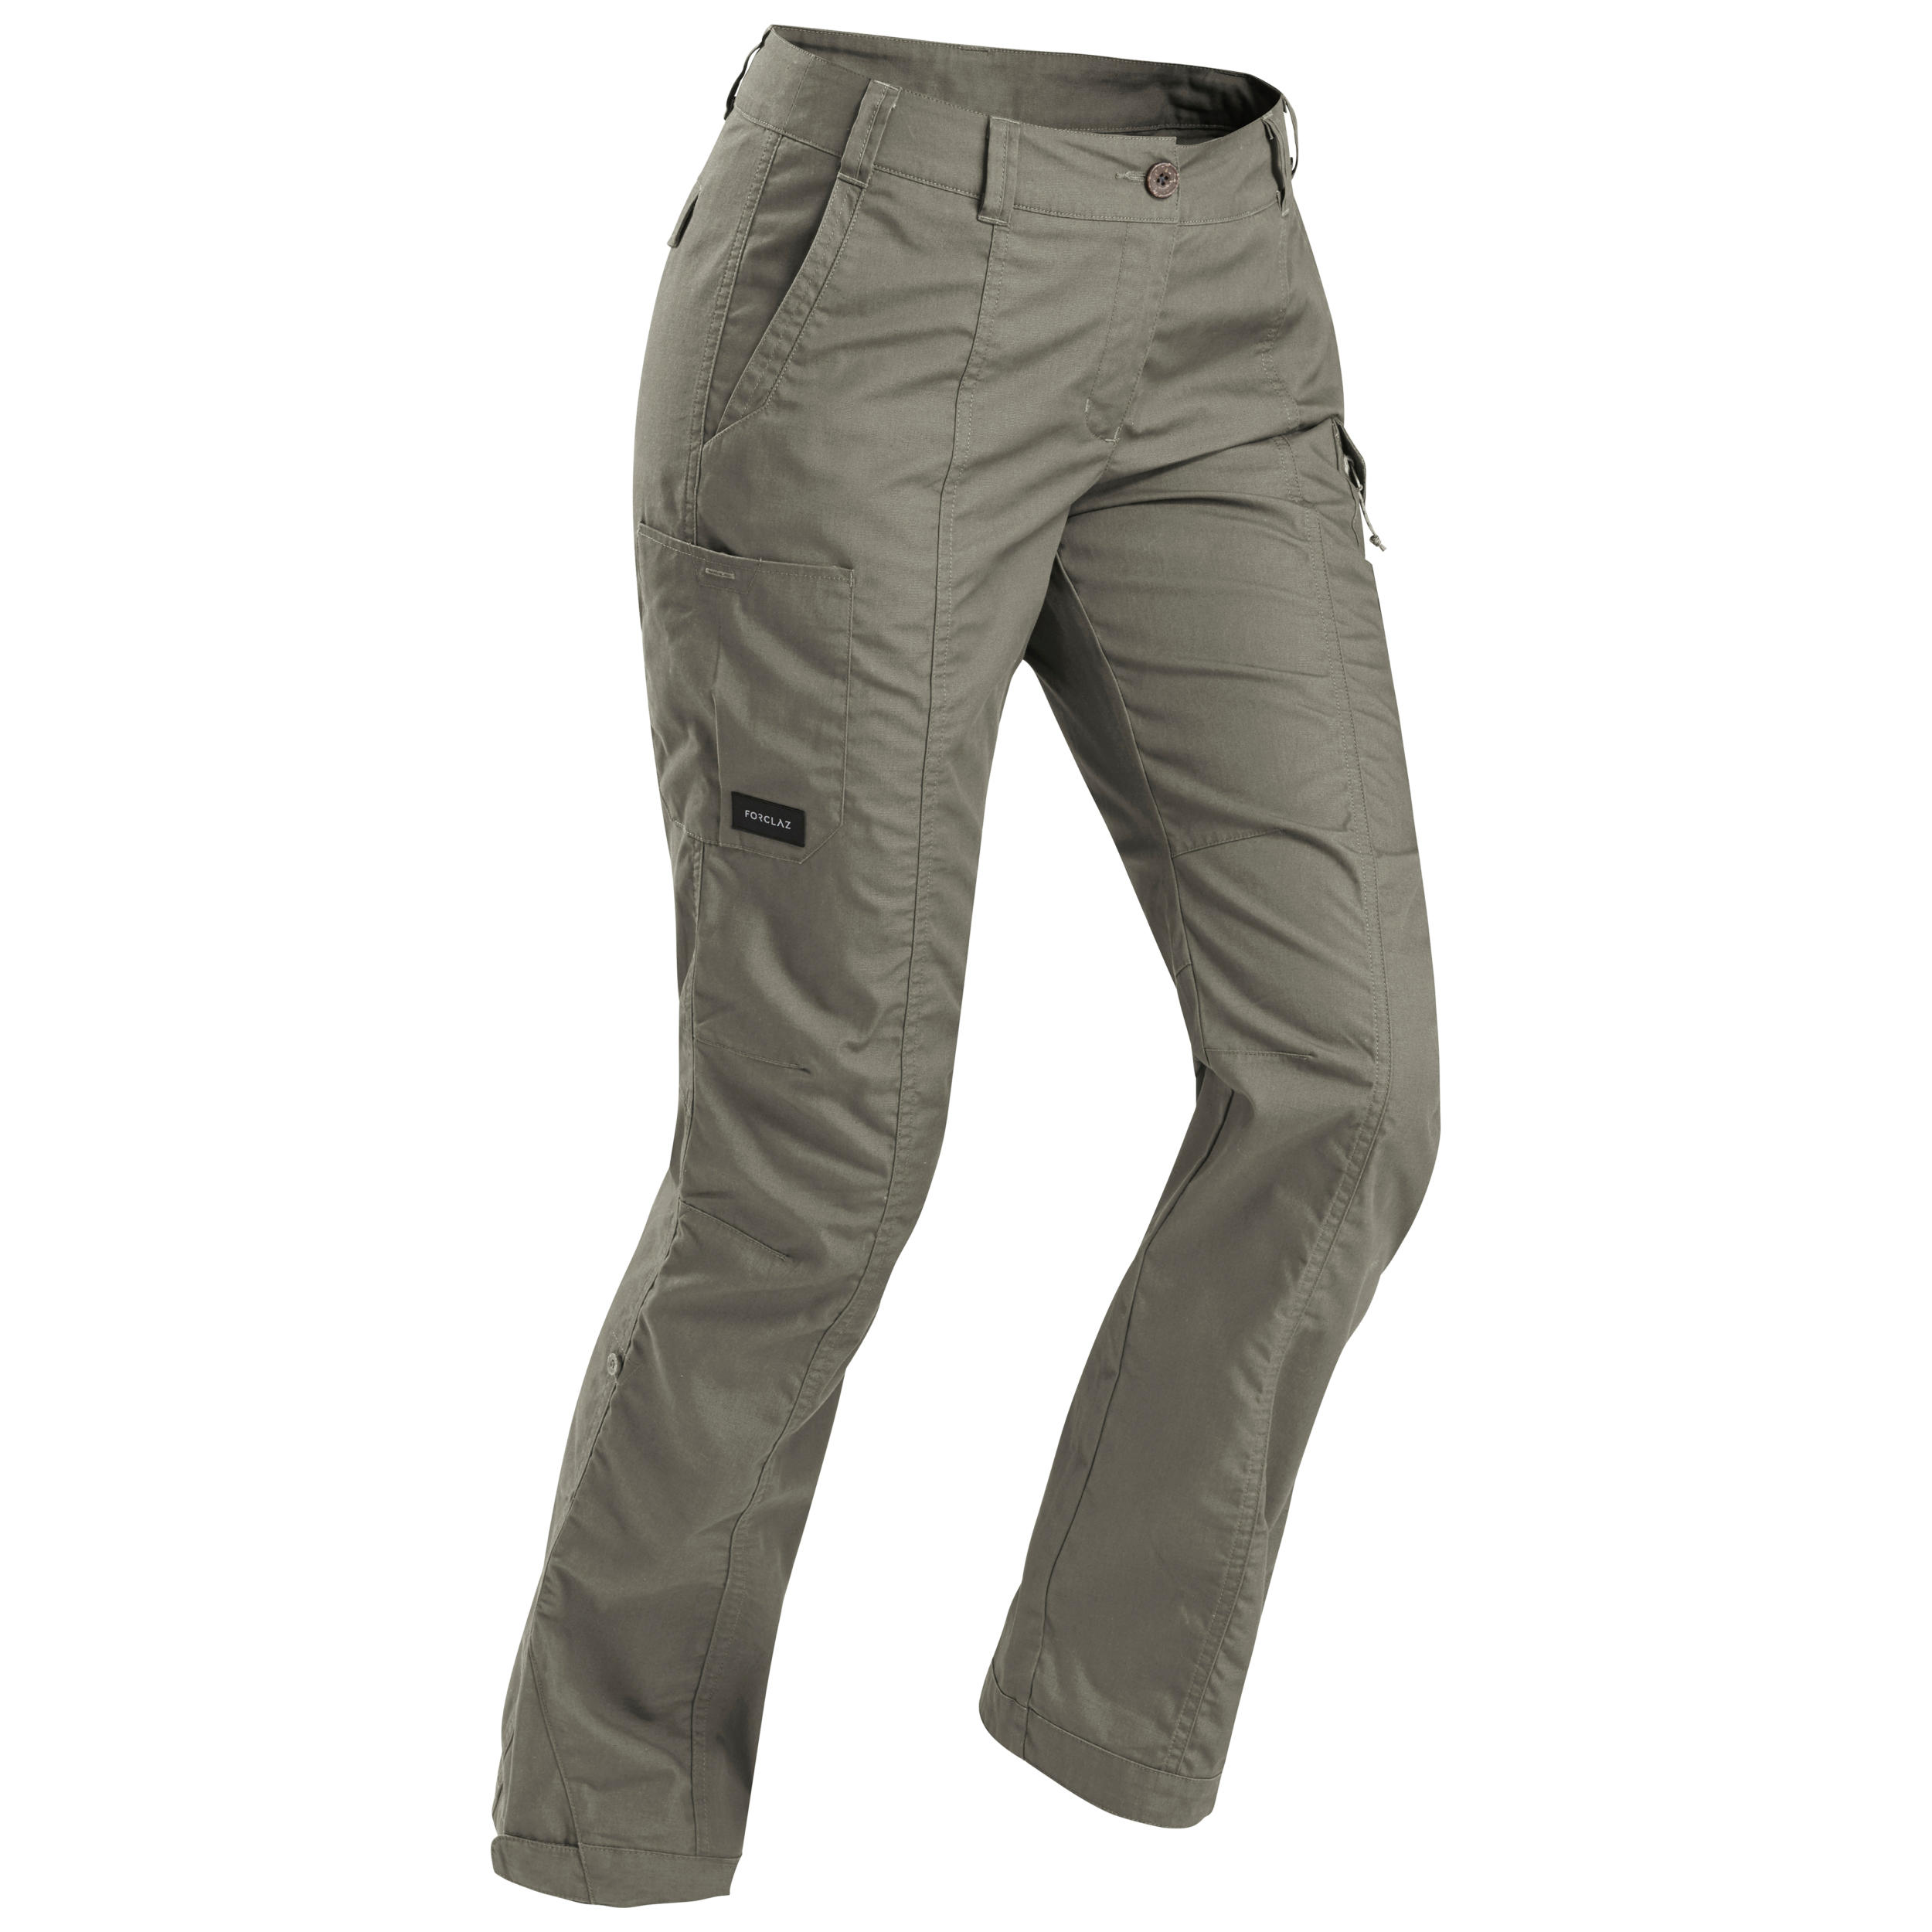 Buy Quechua By Decathlon Men Hiking Trousers NH500 Grey at Redfynd